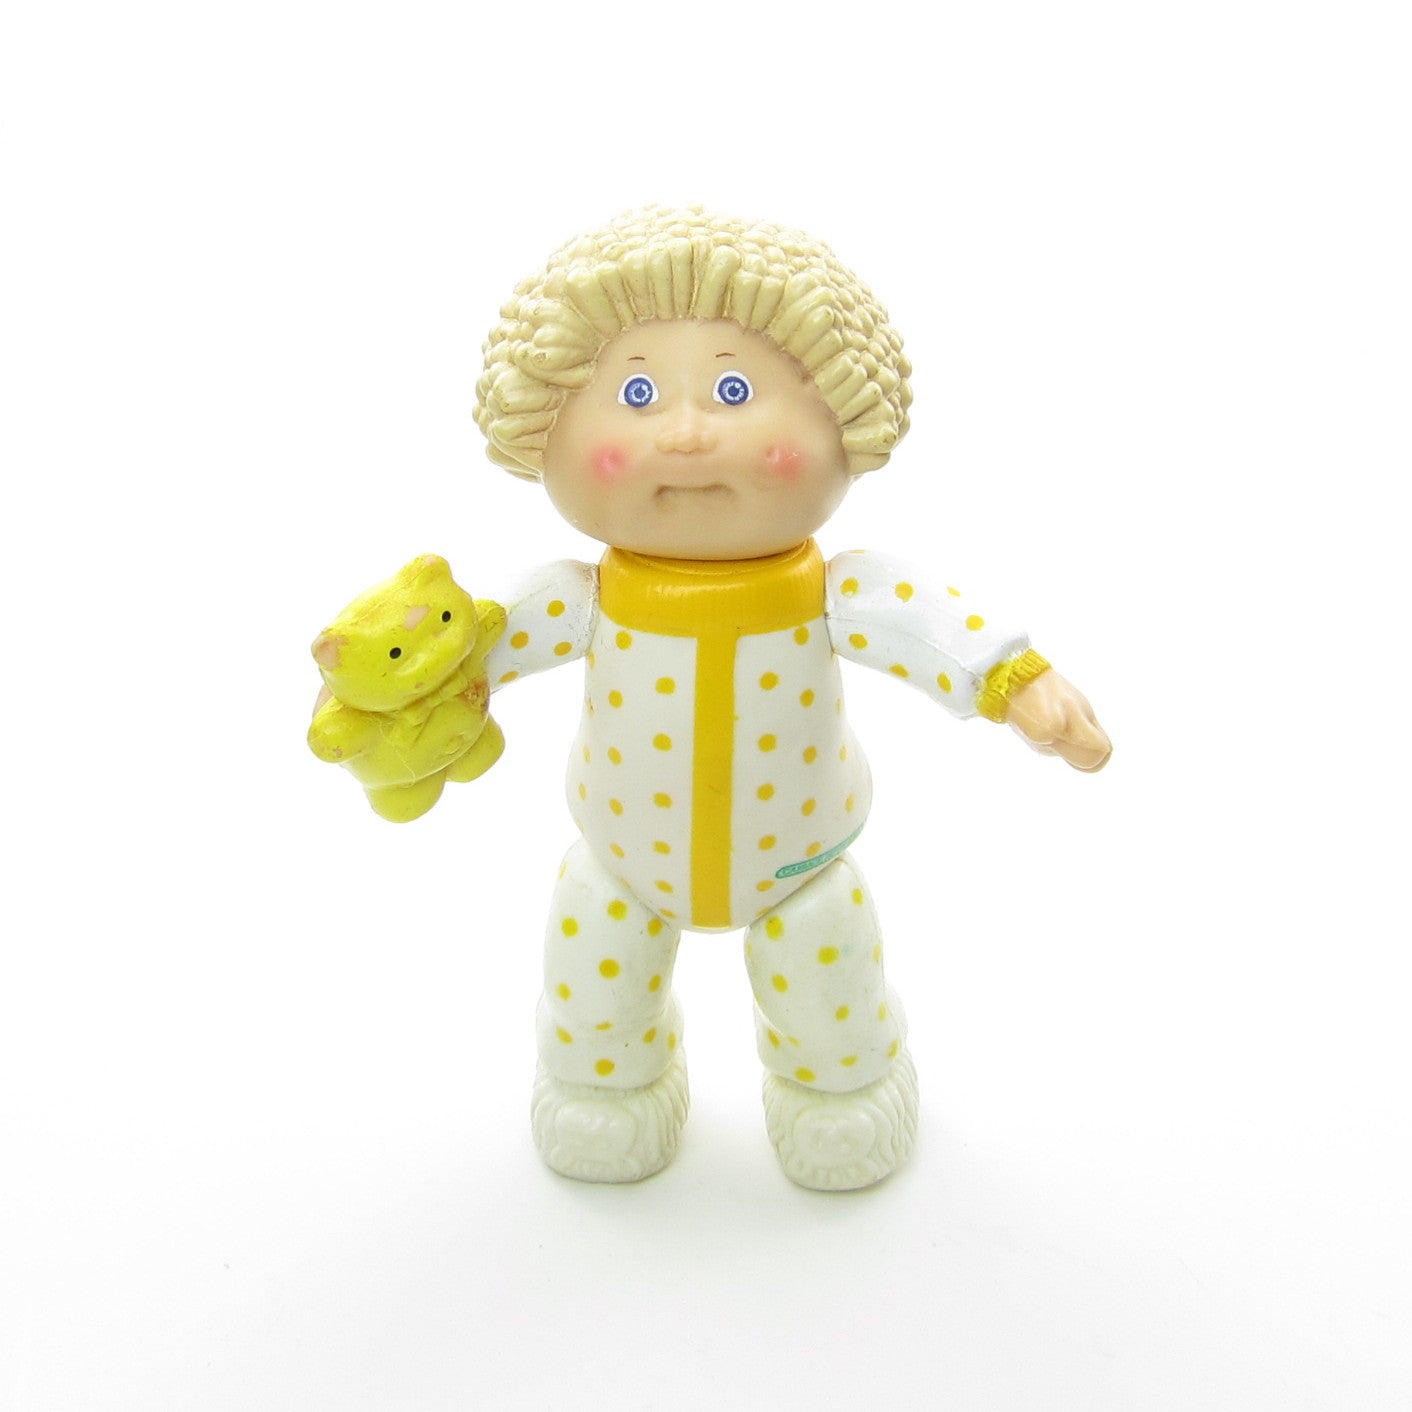 Cabbage Patch Kids boy in pajamas with teddy bear poseable figure